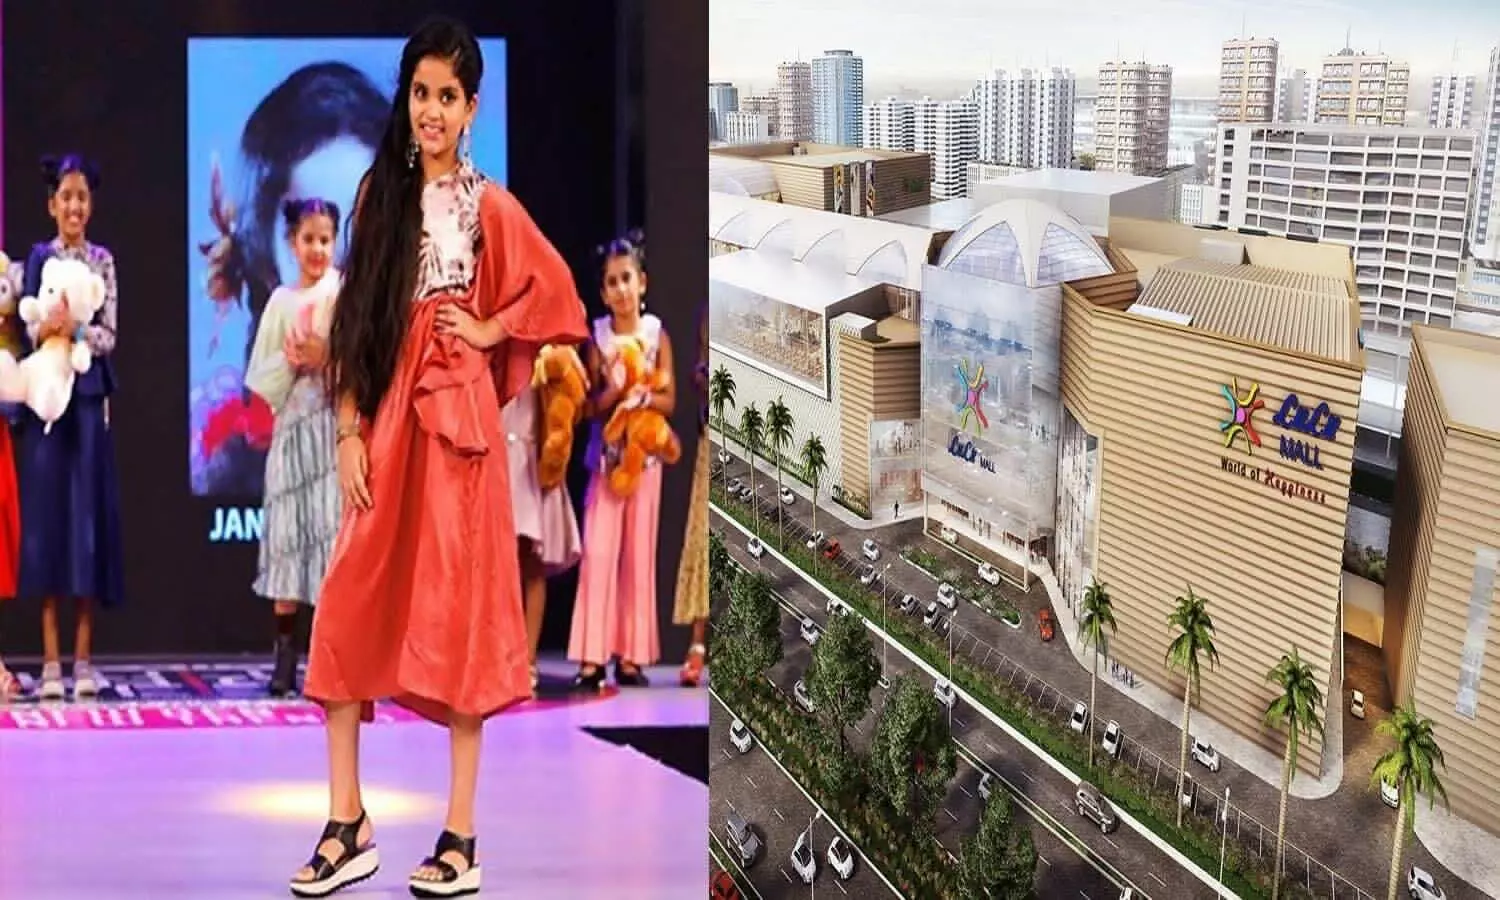 Kids Dress Competition In Lu Lu Mall: Great preparations for Janmashtami, will make Kids Dress Competition in the evening